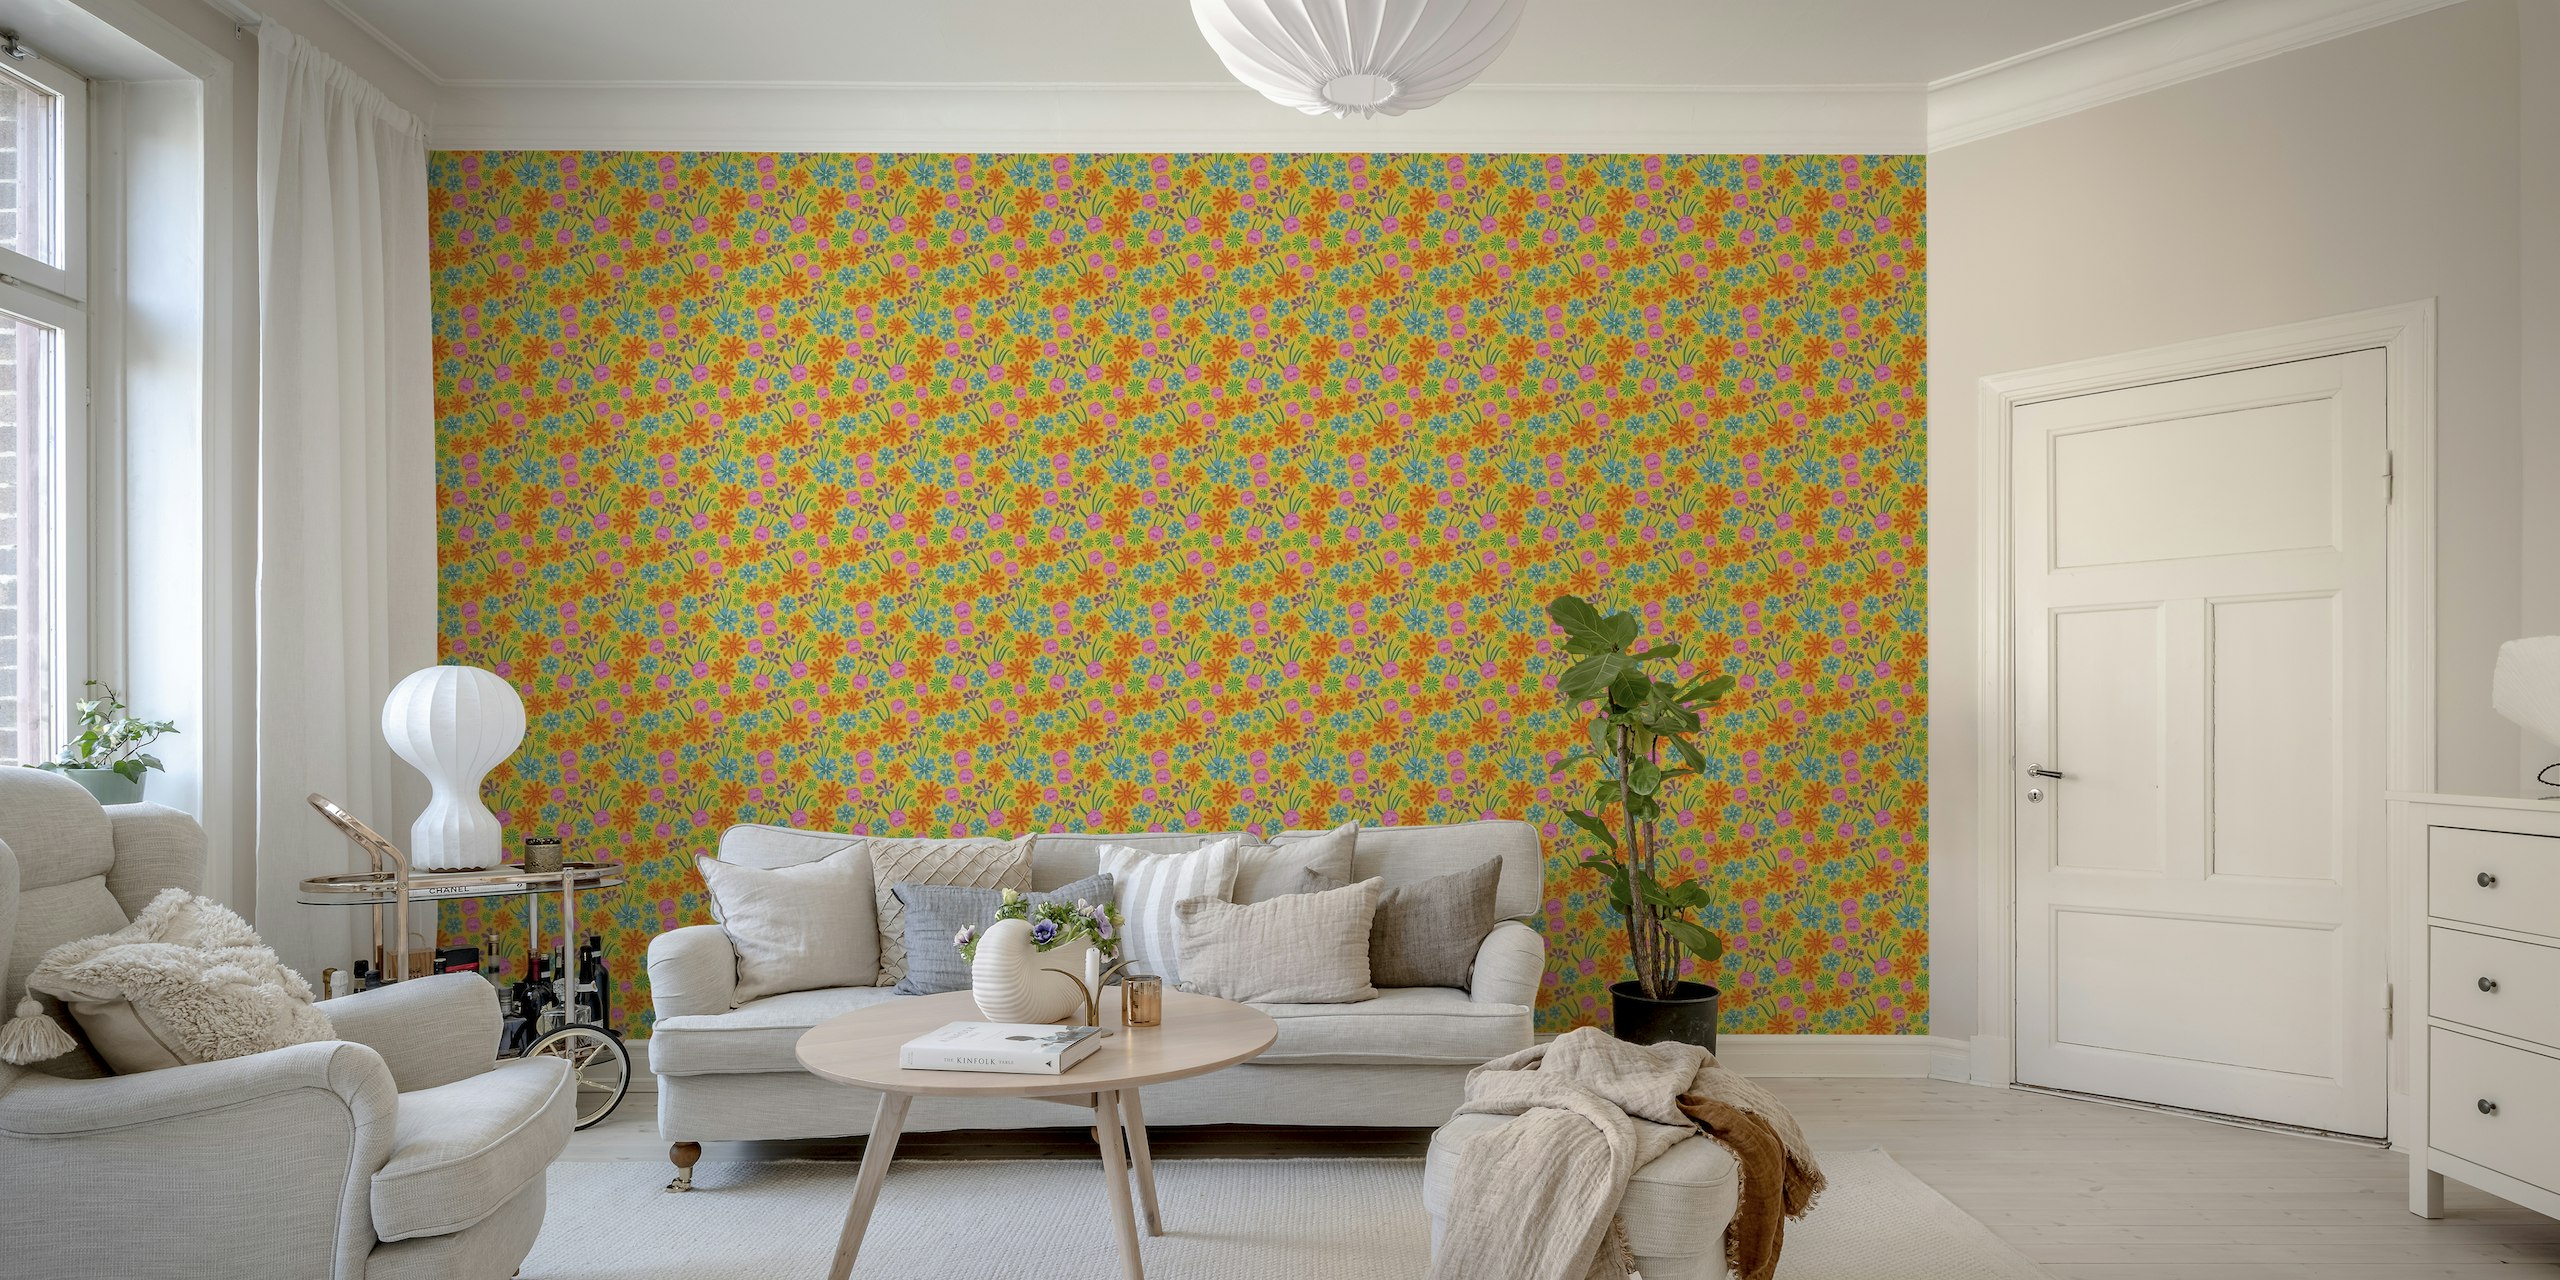 Bright and colorful floral patterns on a yellow wall mural